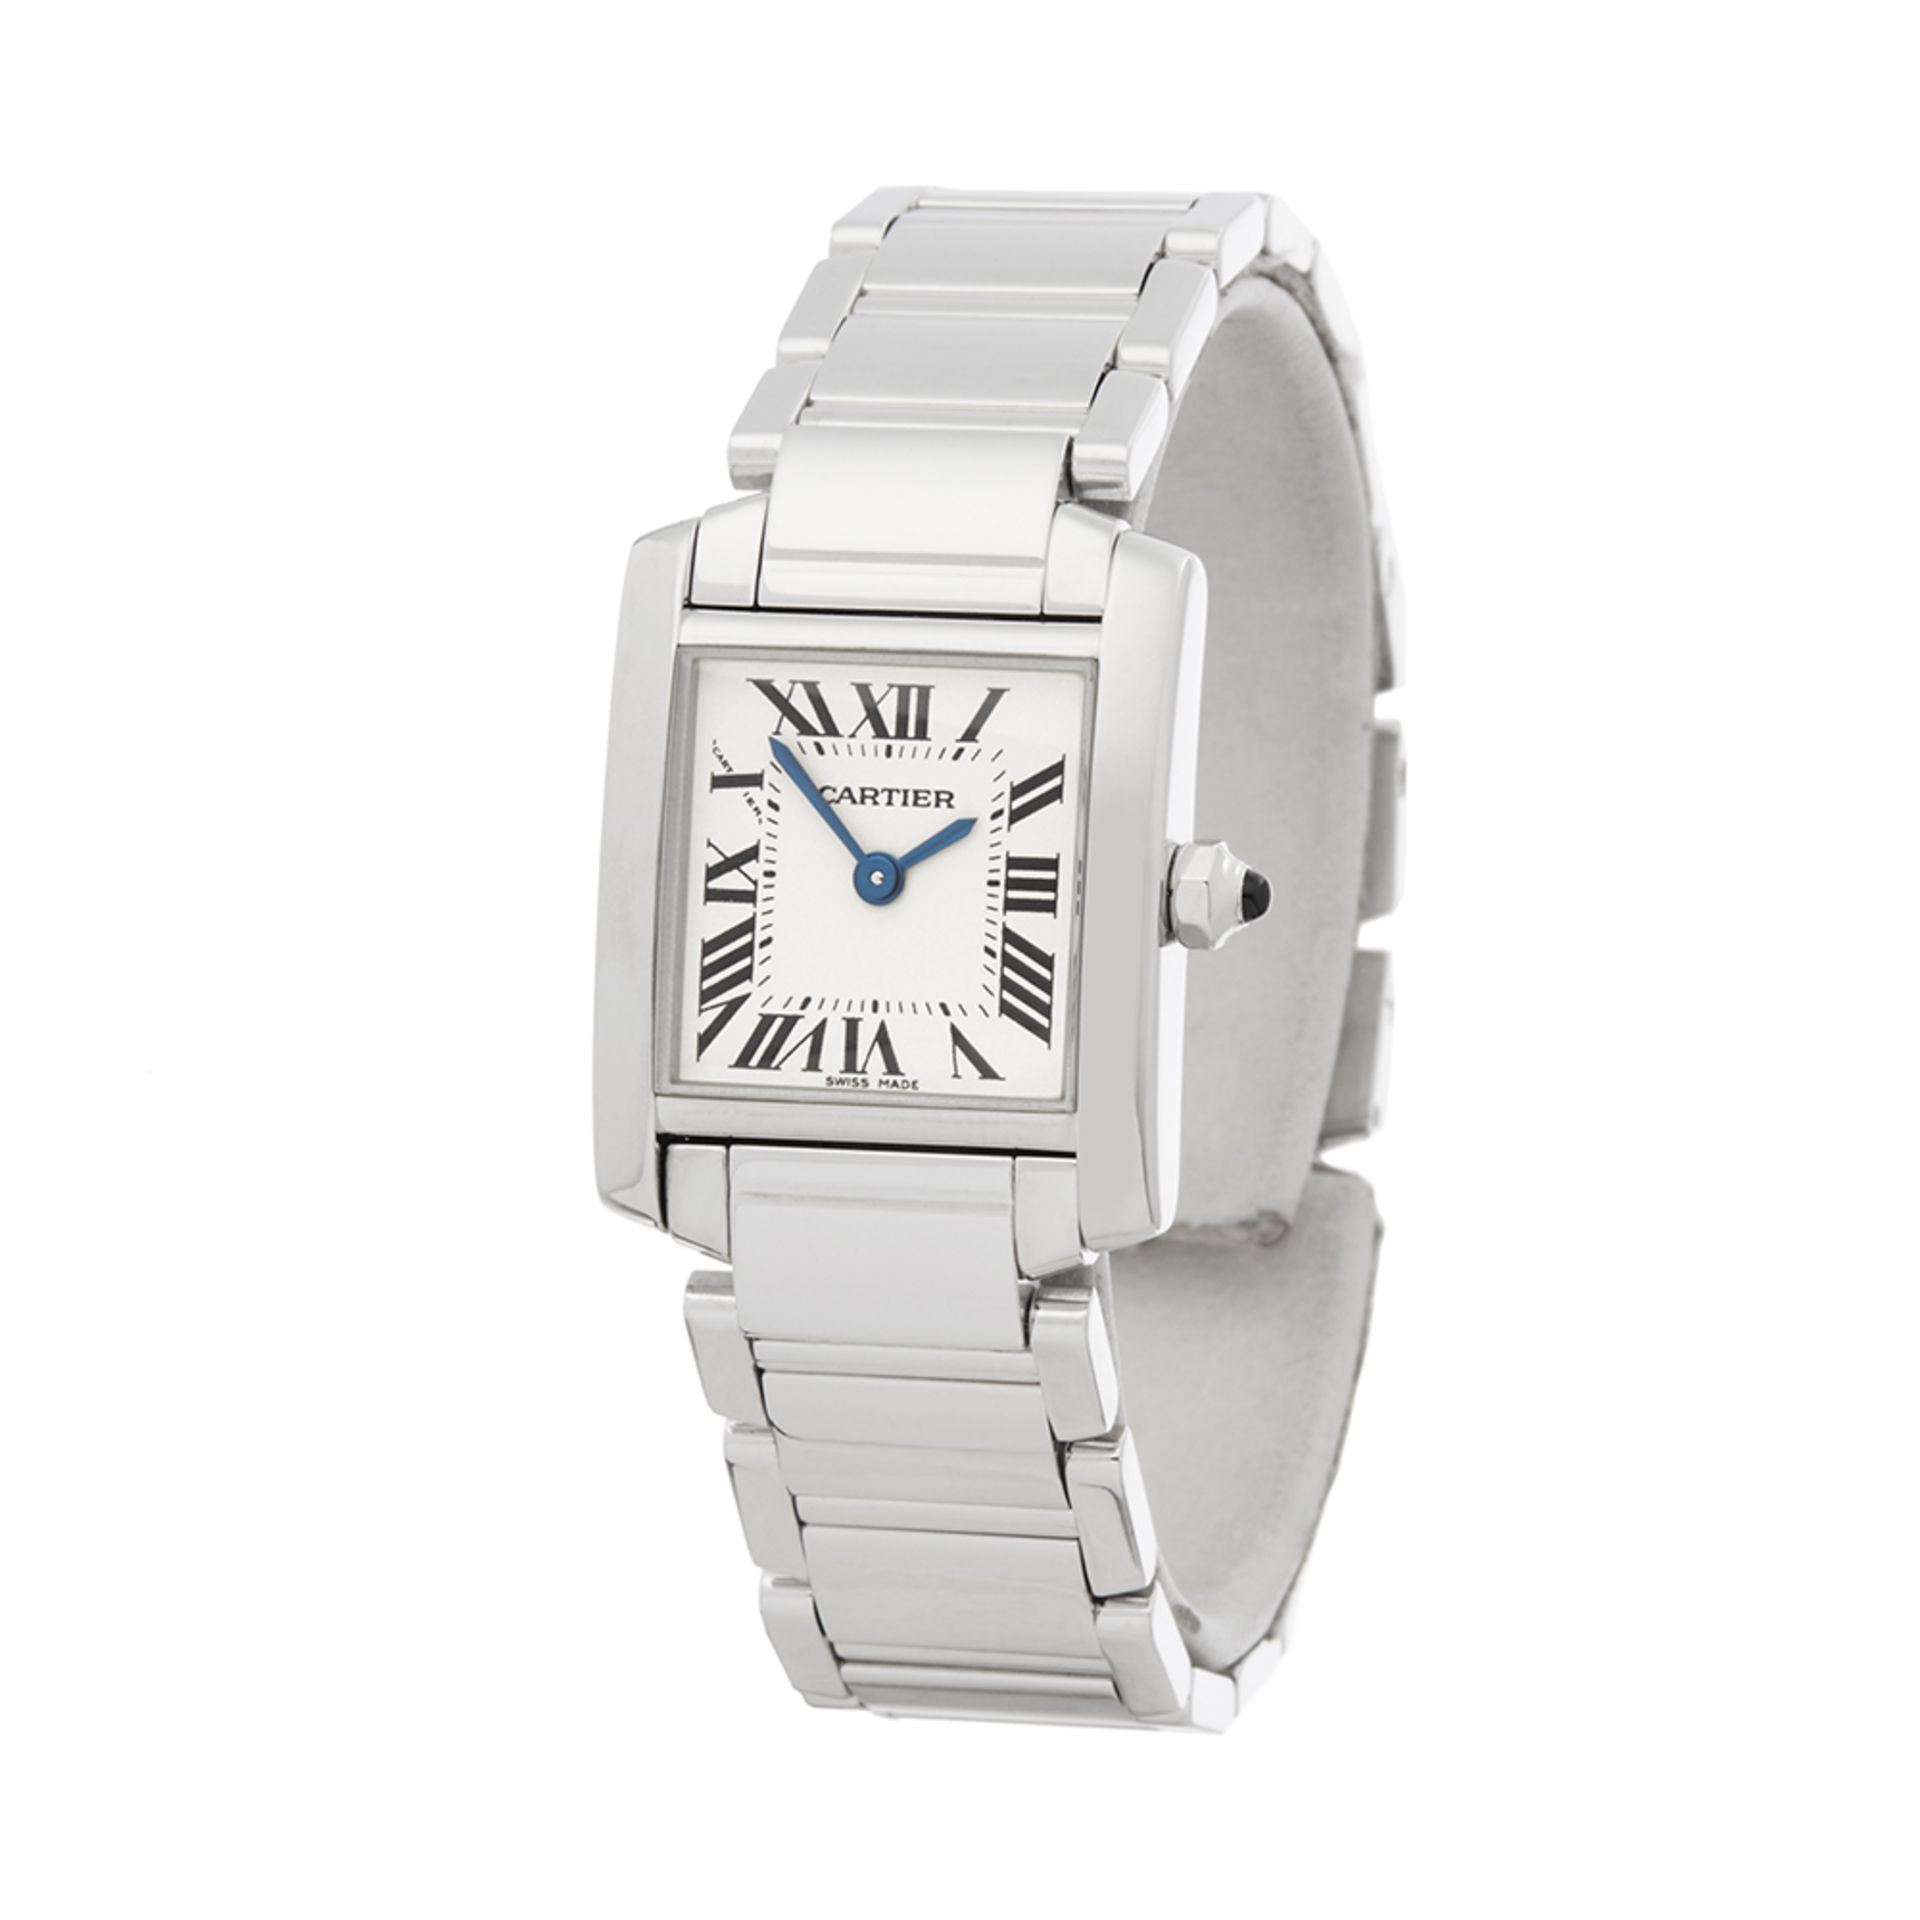 Cartier Tank Francaise 18K White Gold - W50012S3 - Image 3 of 7